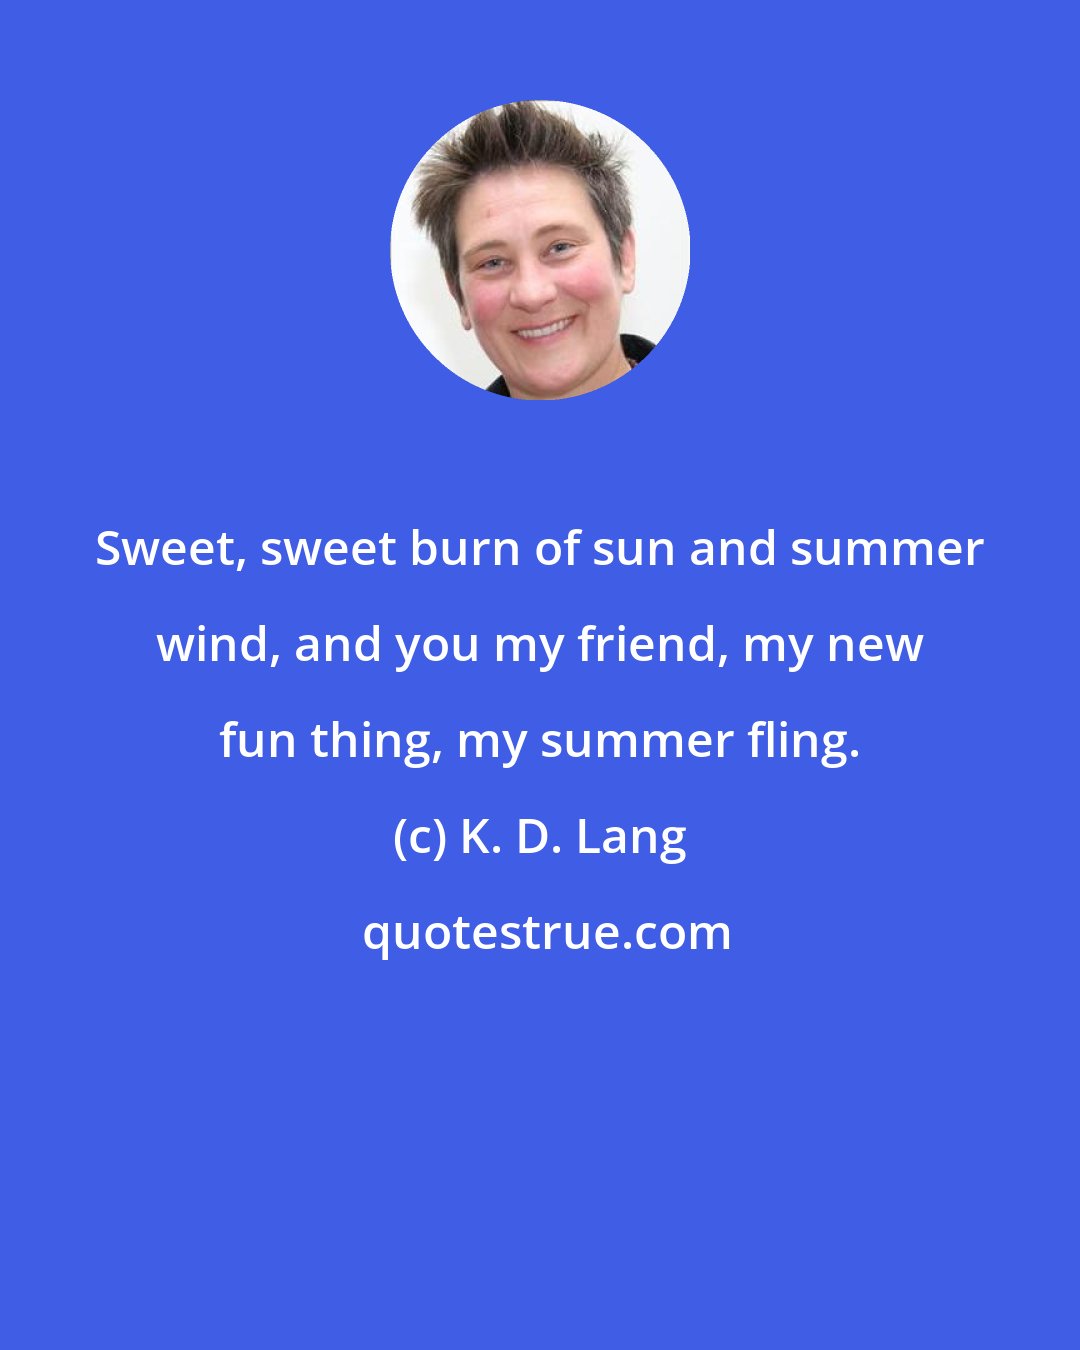 K. D. Lang: Sweet, sweet burn of sun and summer wind, and you my friend, my new fun thing, my summer fling.